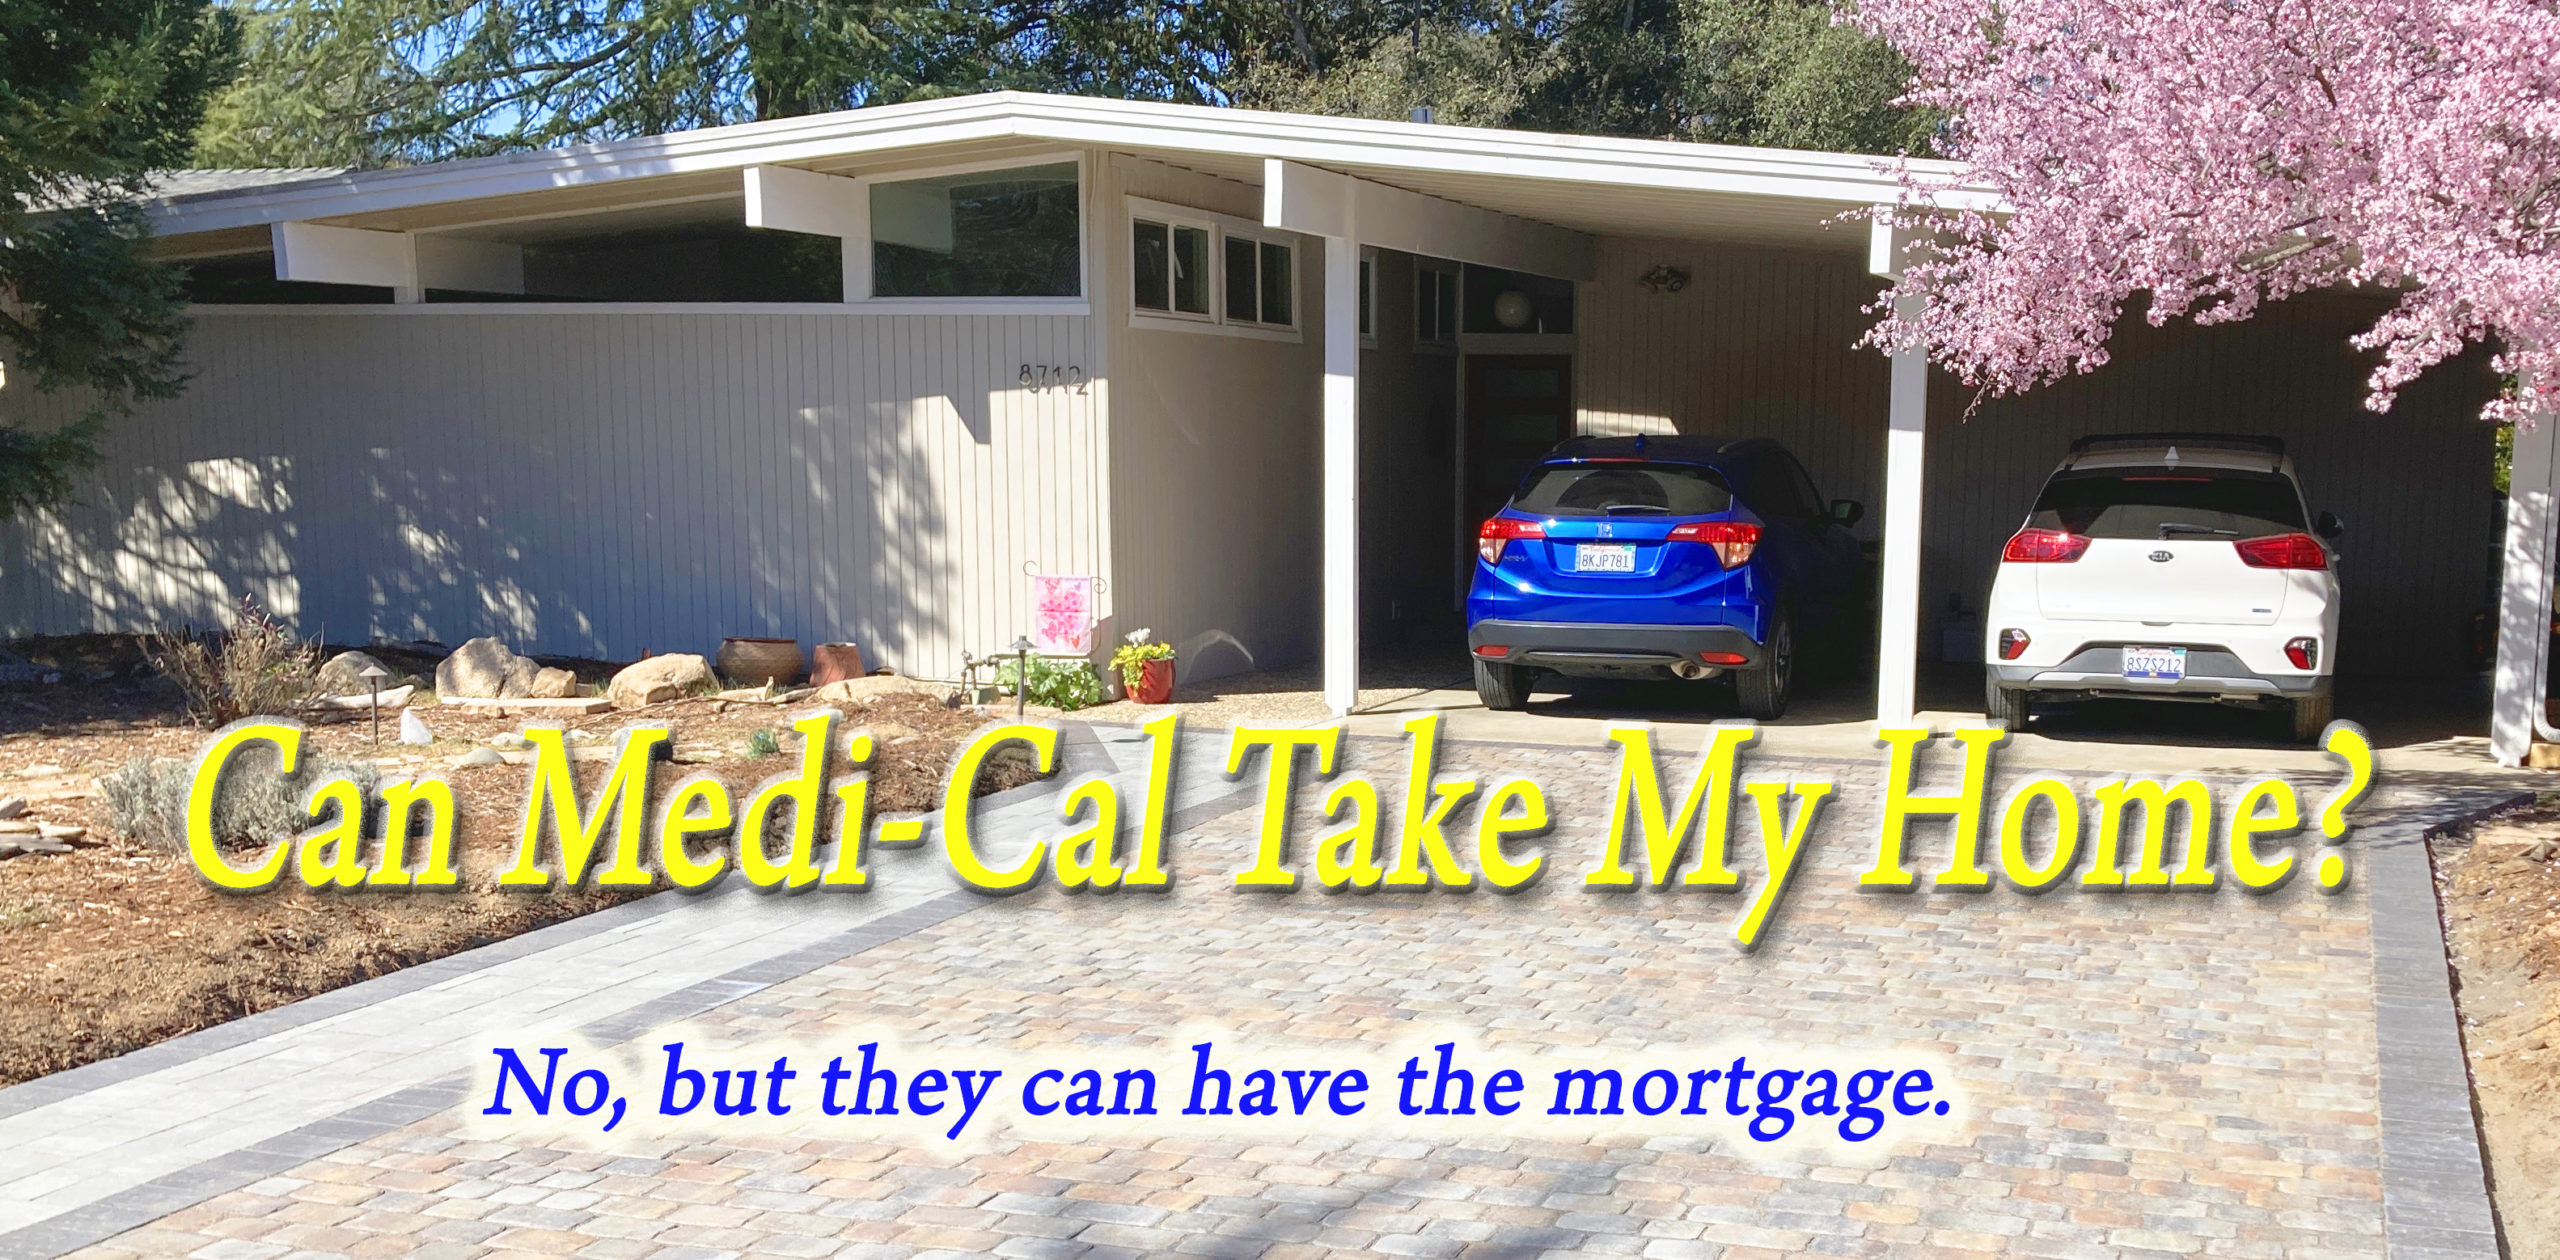 Can Medi-Cal force you to sell your home?